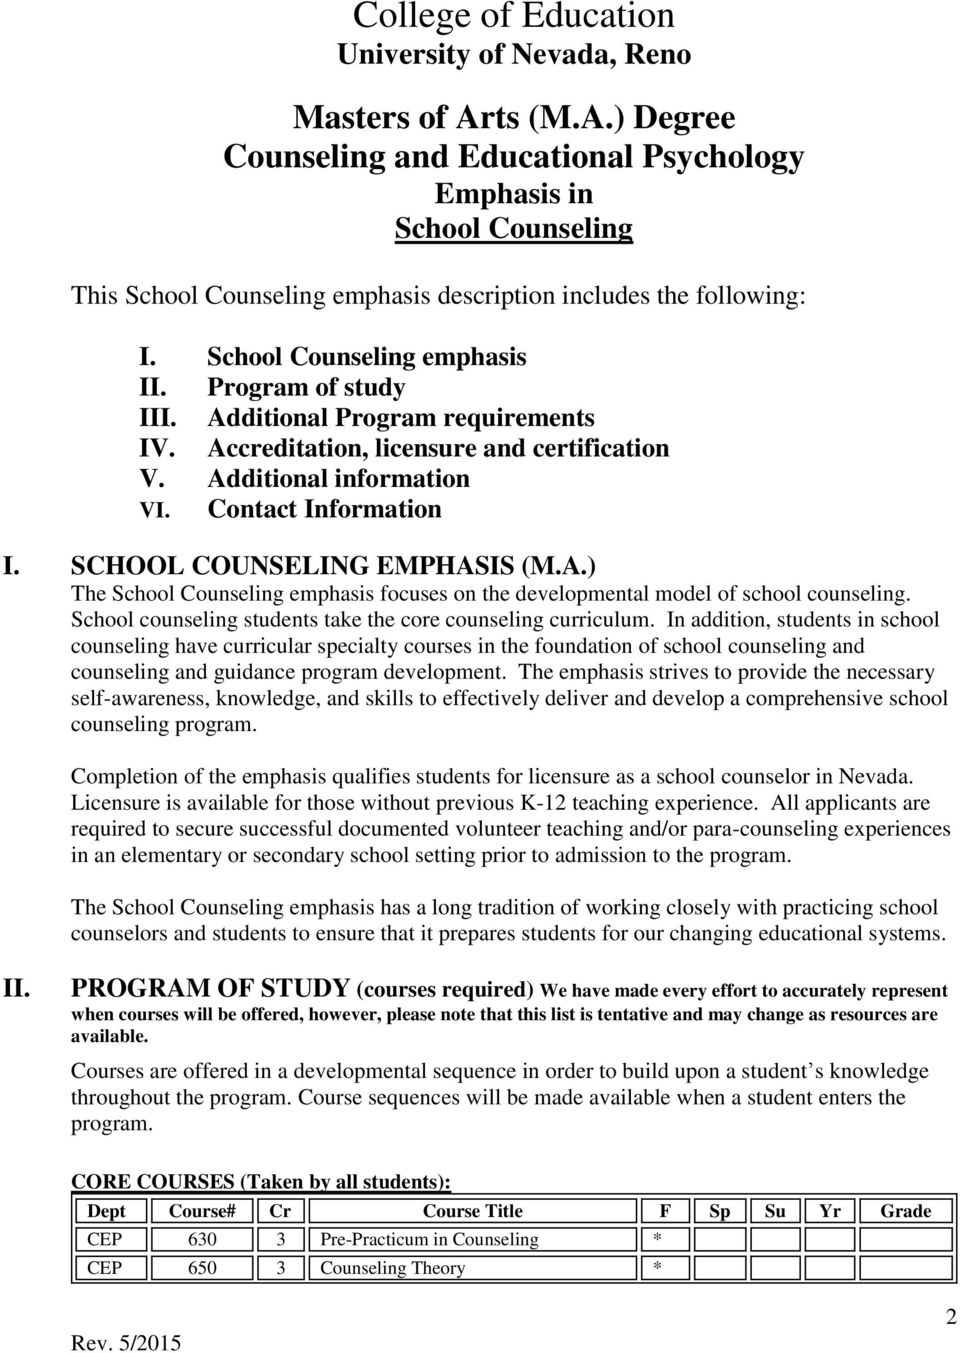 SCHOOL COUNSELING EMPHASIS (M.A.) The School Counseling emphasis focuses on the developmental model of school counseling. School counseling students take the core counseling curriculum.